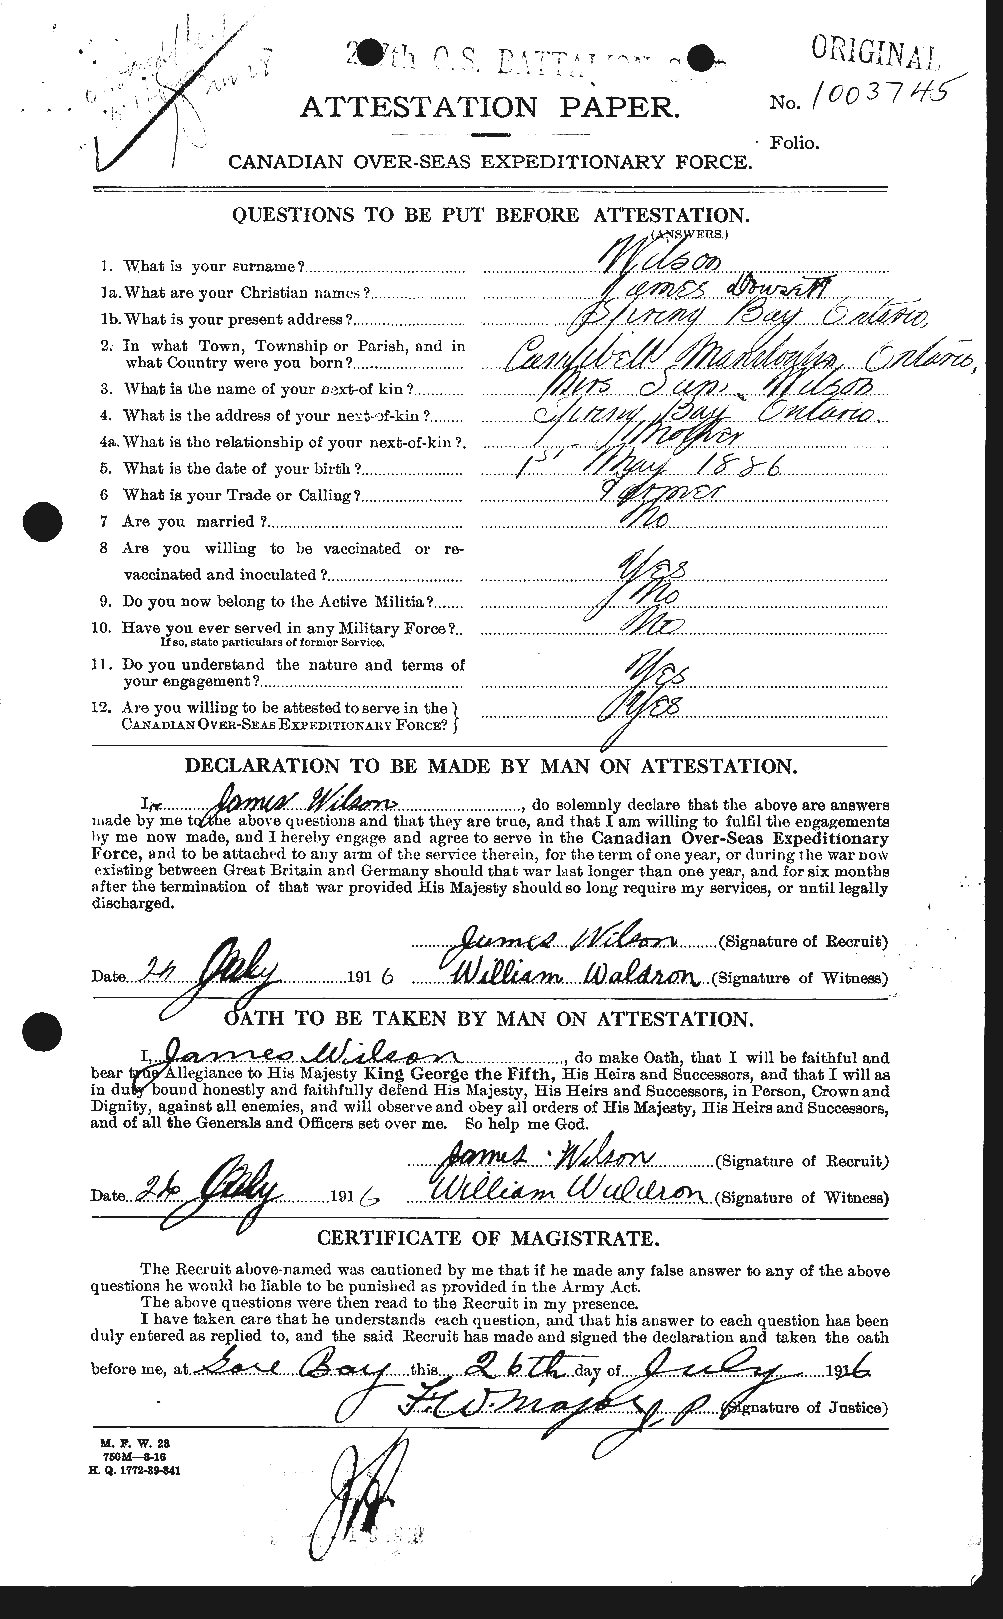 Personnel Records of the First World War - CEF 681437a